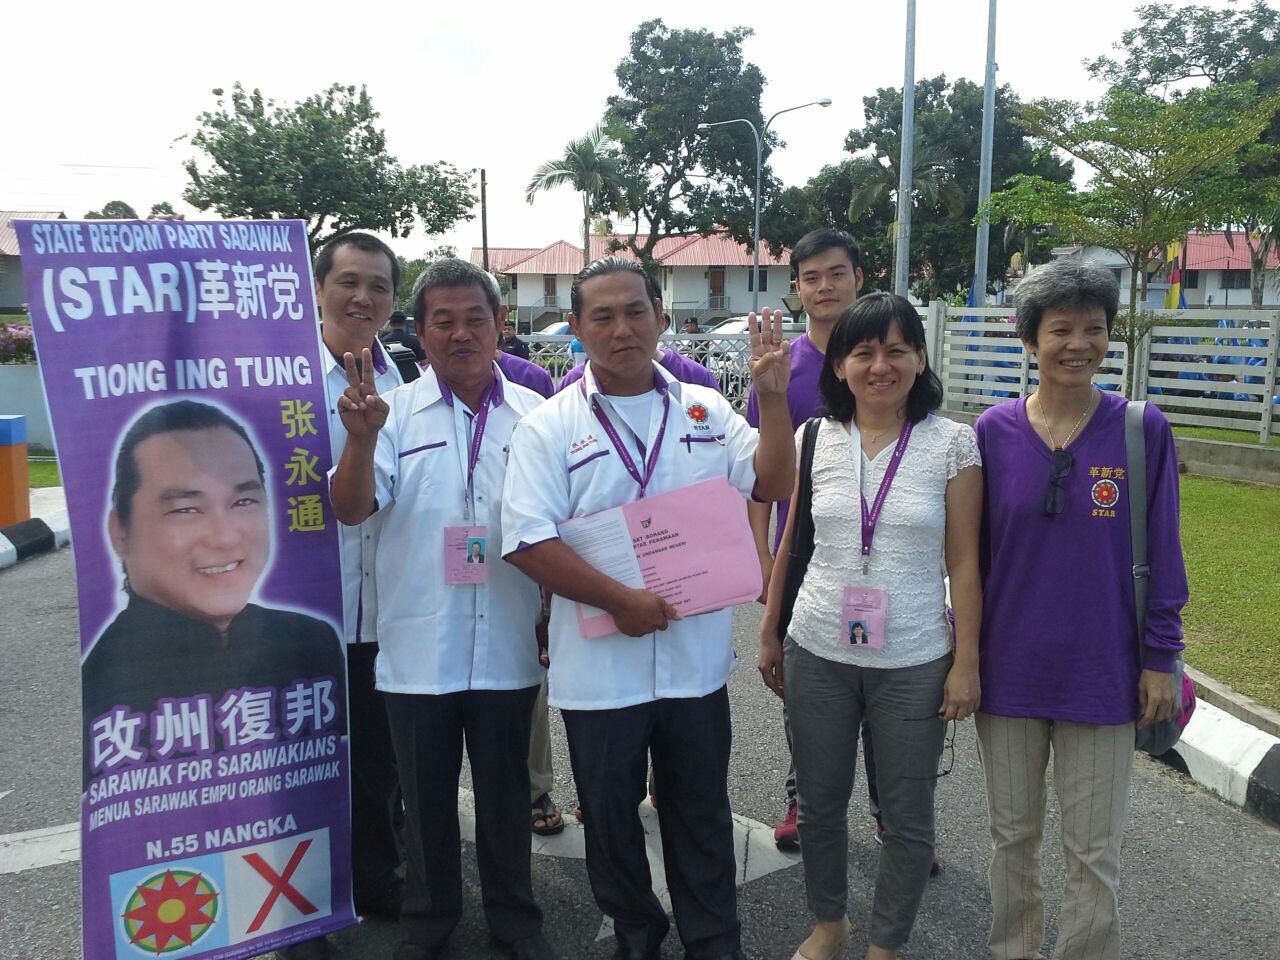 STAR secretary-general Simon Tiong (third left), 48, who is candidate, accompanied by proposer Tiong Ing Ngien (second right), 42, and seconder Wong Kiong Hee (second left), 60 arrived at Sibu Islamic Complex at 9.10am and entered the nomination centre at 9.20am. Several supporters turned up to show their support.